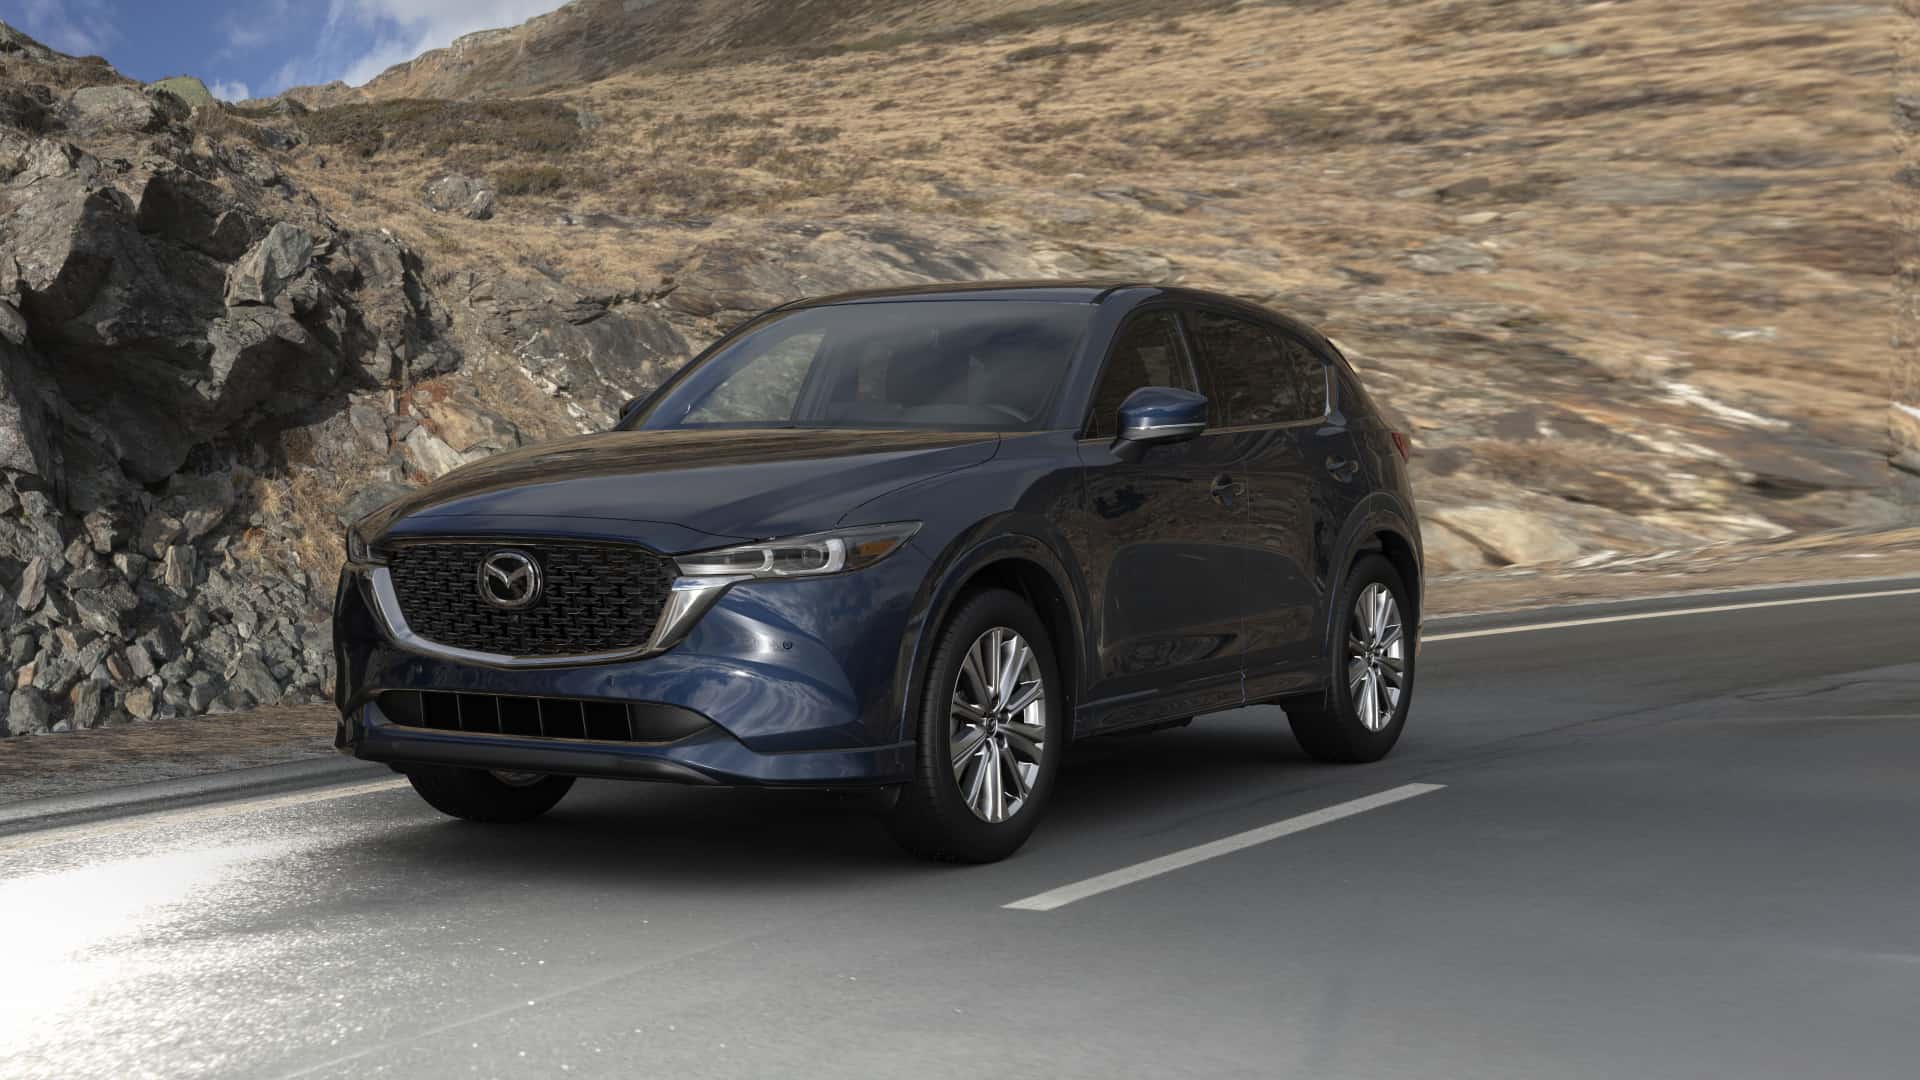 2023 Mazda CX-5 2.5 Turbo Signature Deep Crystal Blue Mica| Russell & Smith Mazda in Houston TX